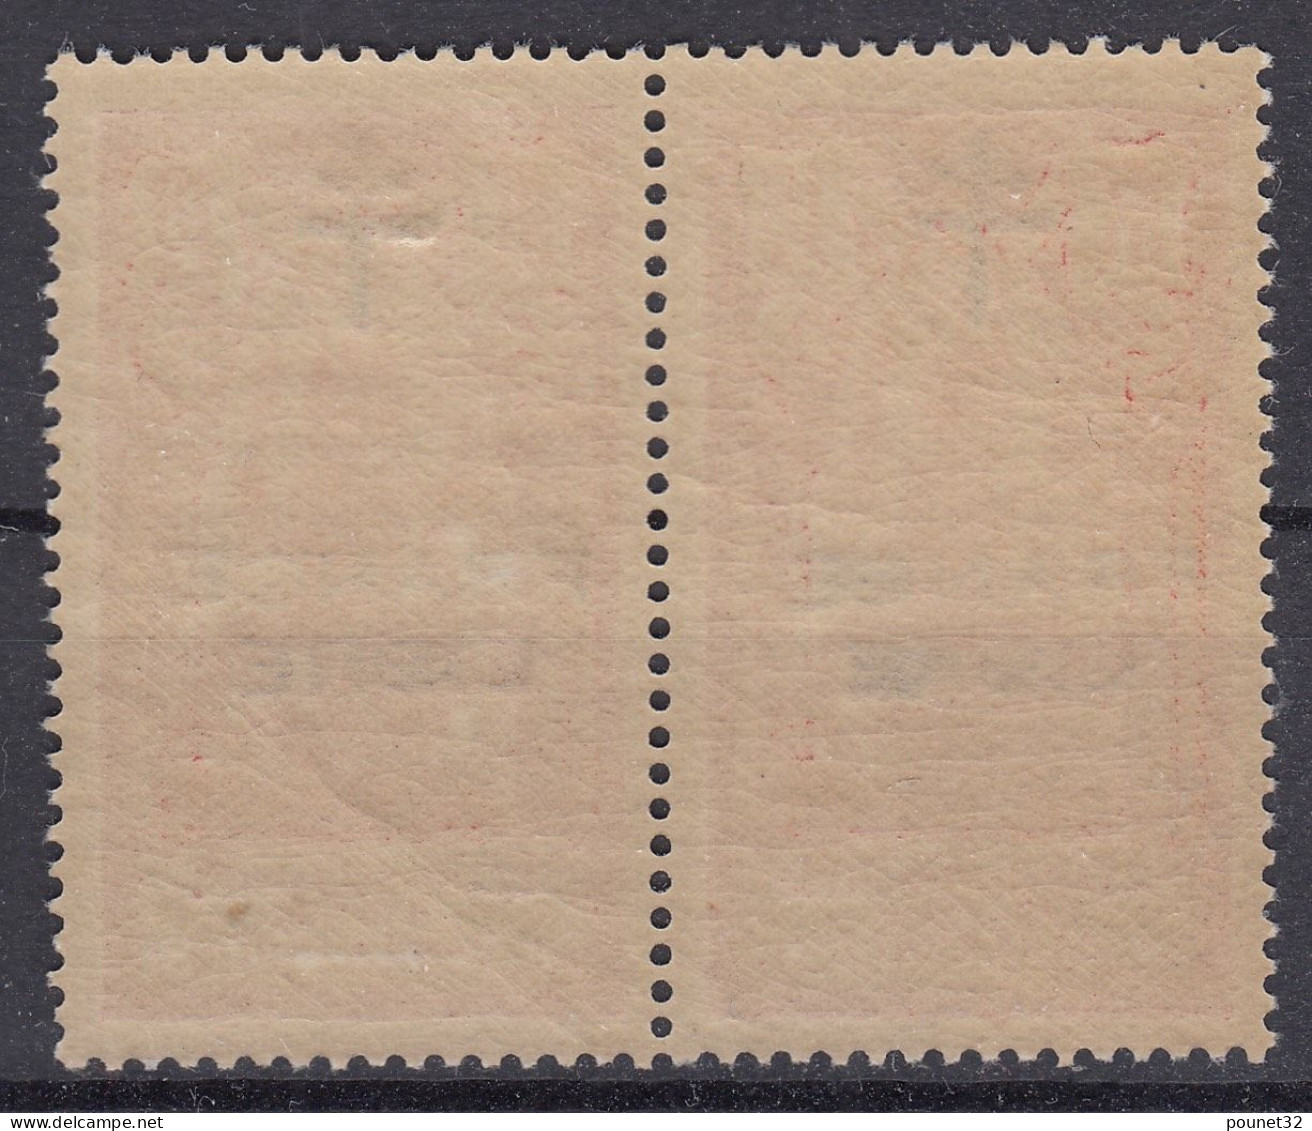 INDE FRANCE LIBRE N° 181 SURCHARGE EMPATEE + NORMAL NEUF ** GOMME SANS CHARNIERE - Unused Stamps